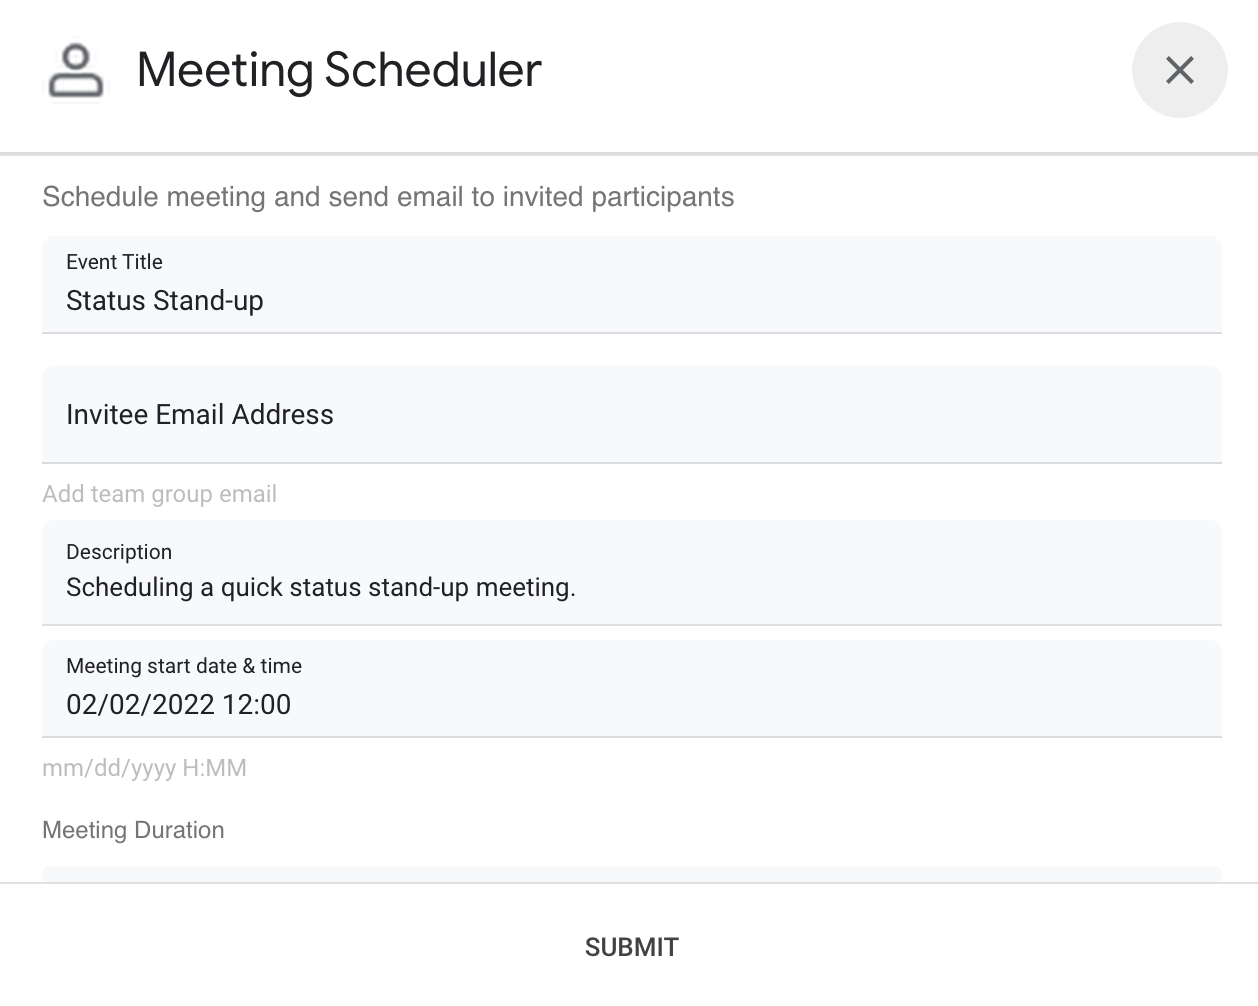 Dialog interface of the Meeting Scheduler Chat app